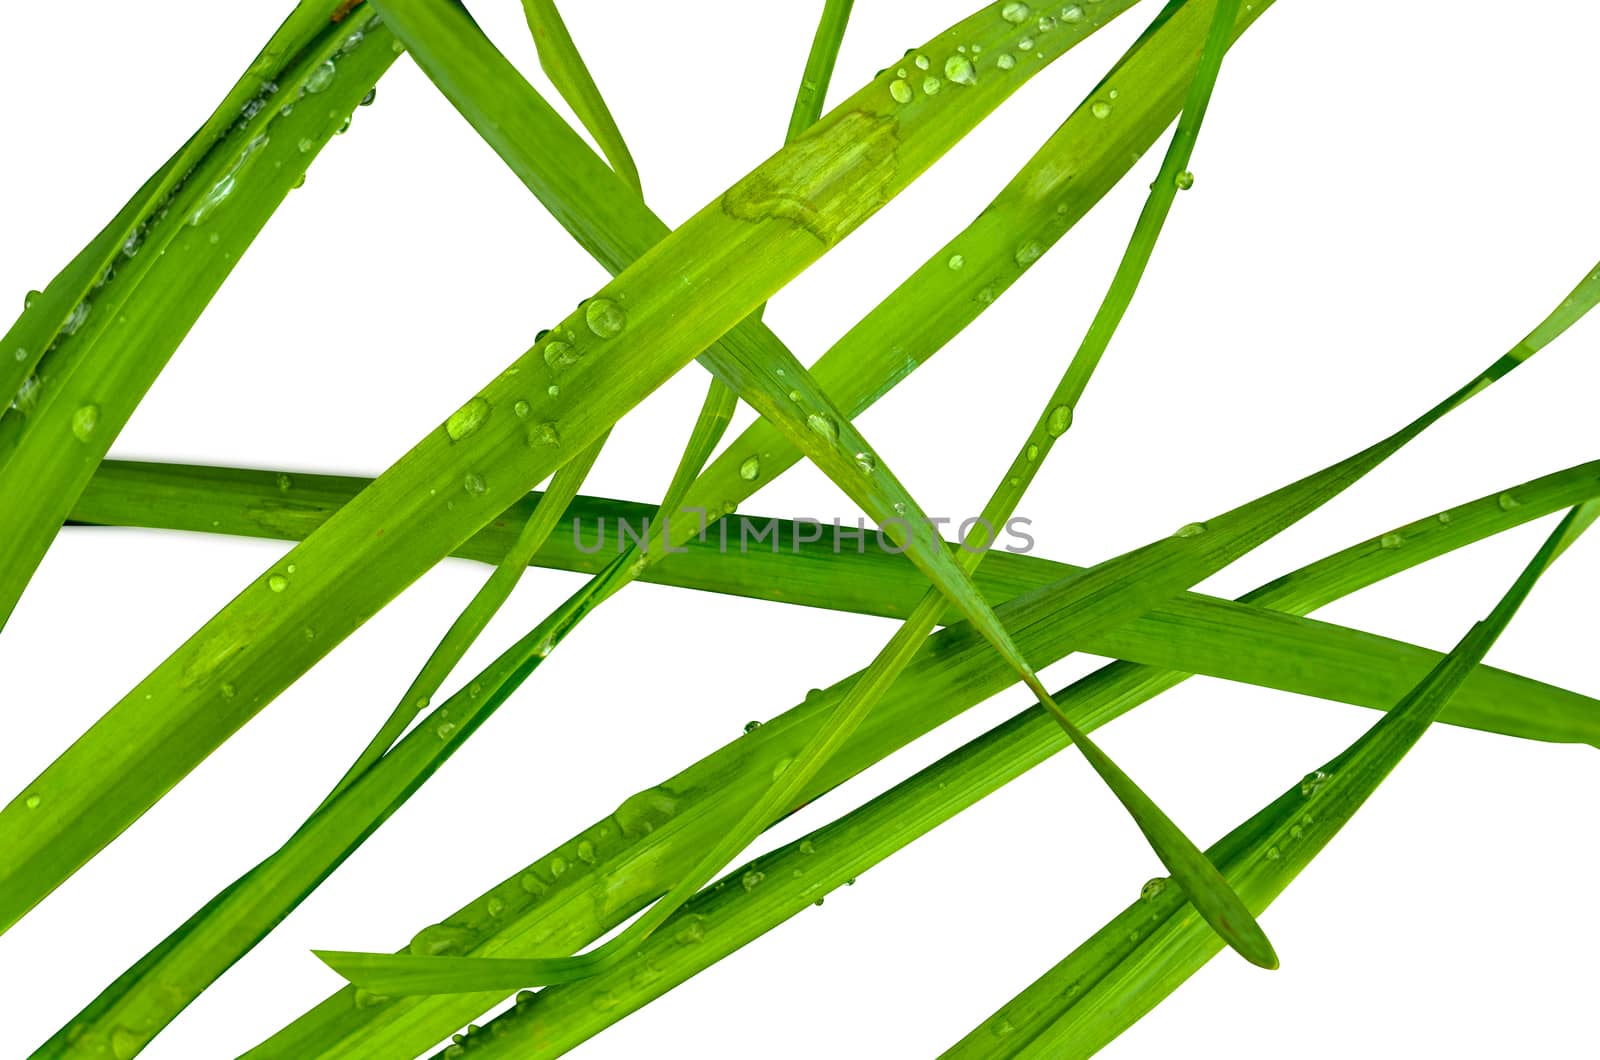 Isolated Blades Of Wet Summer Grass Against A White Background